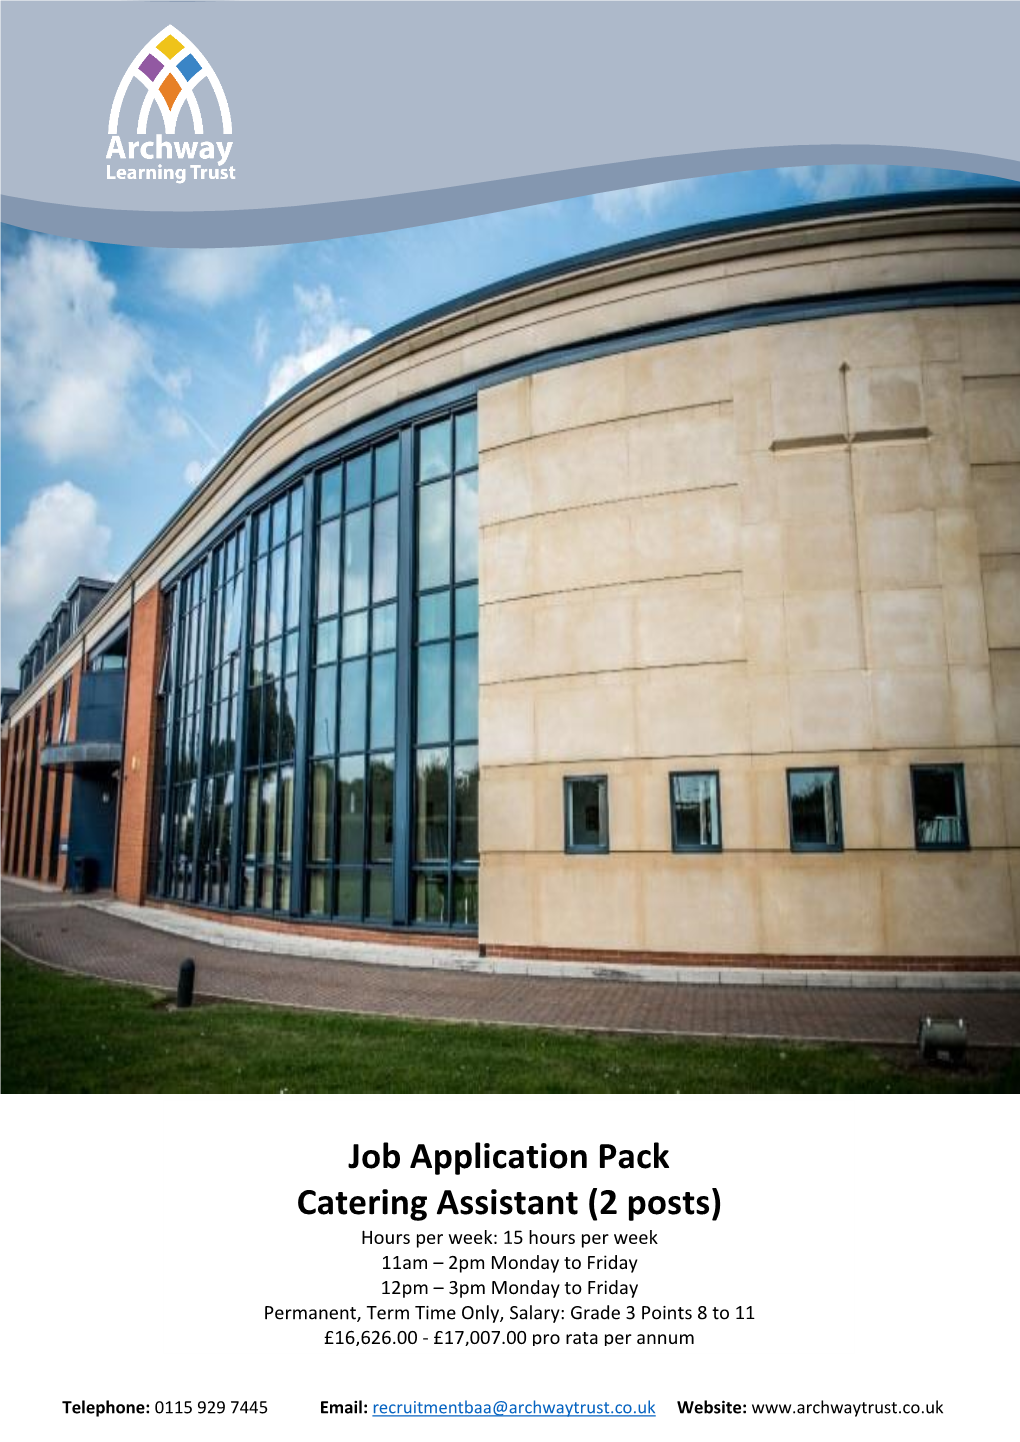 Job Application Pack Catering Assistant (2 Posts)